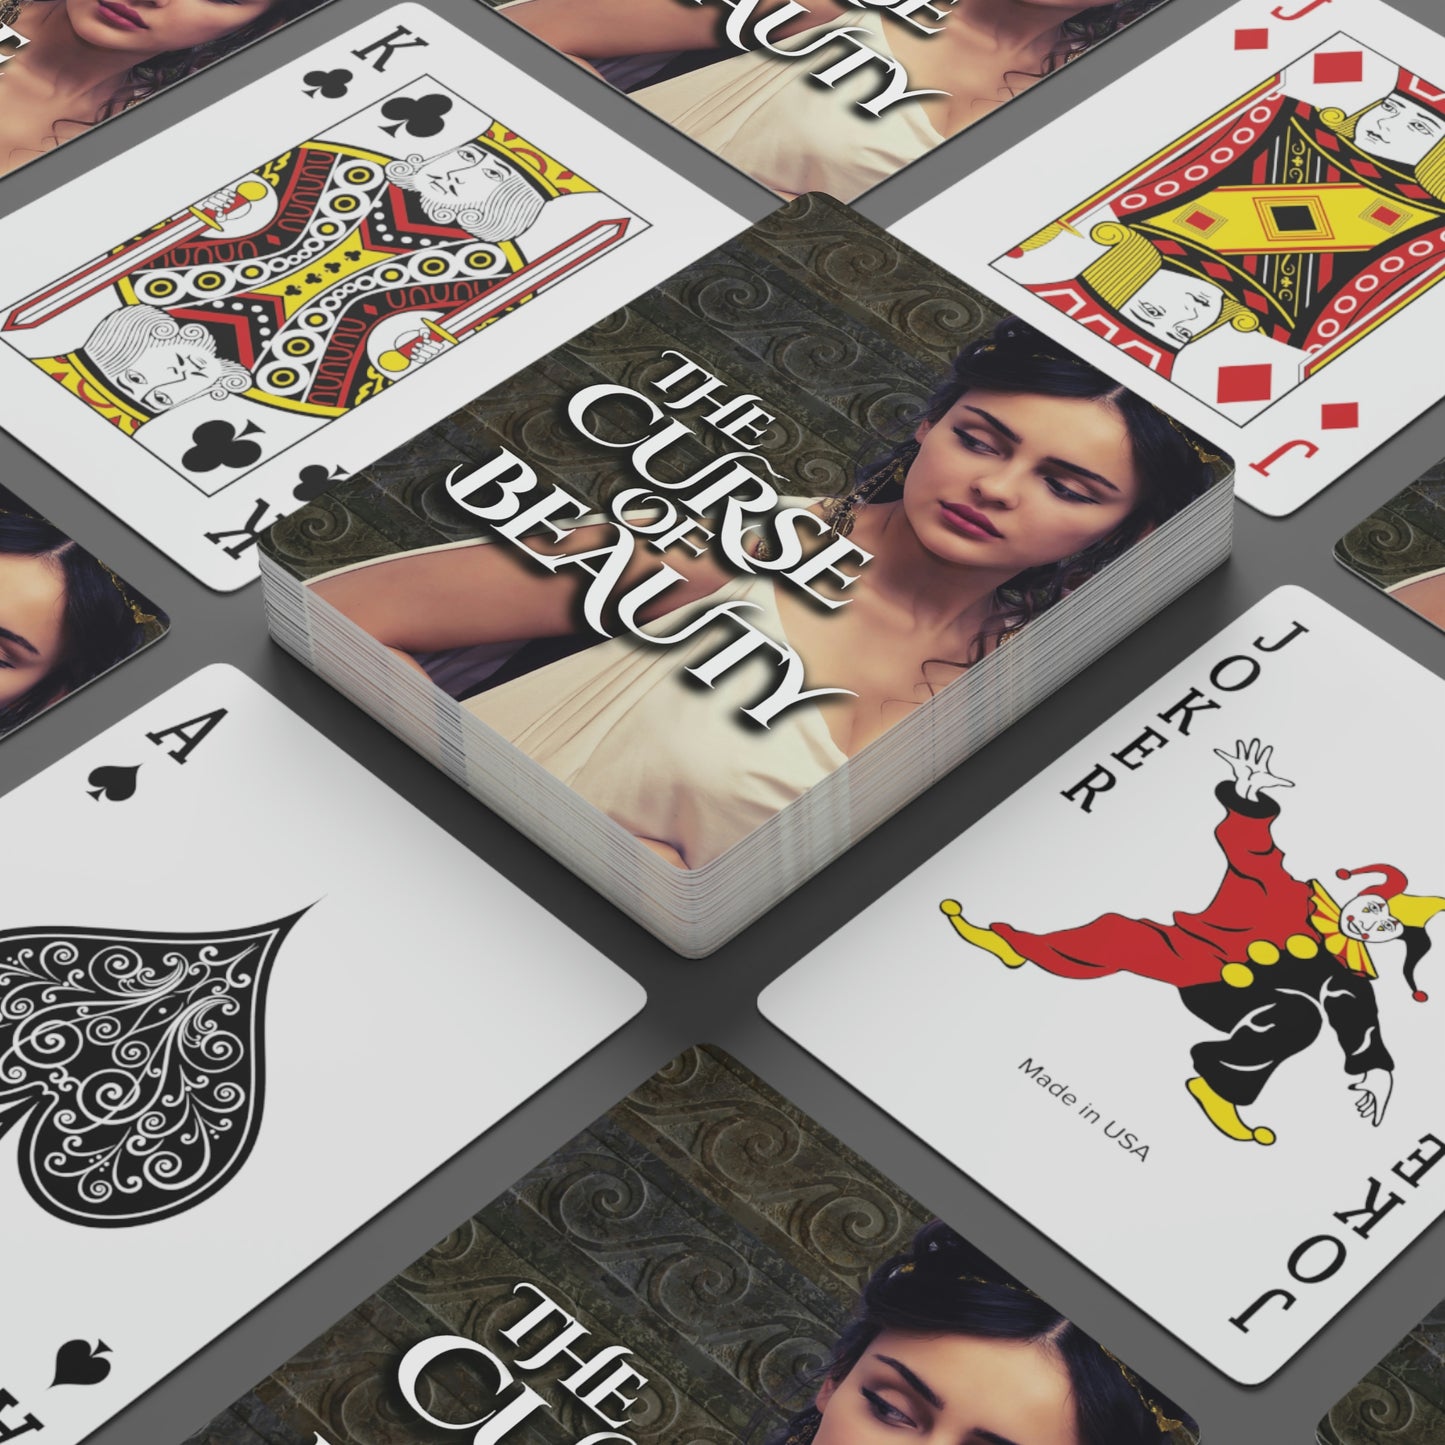 The Curse of Beauty Playing Cards